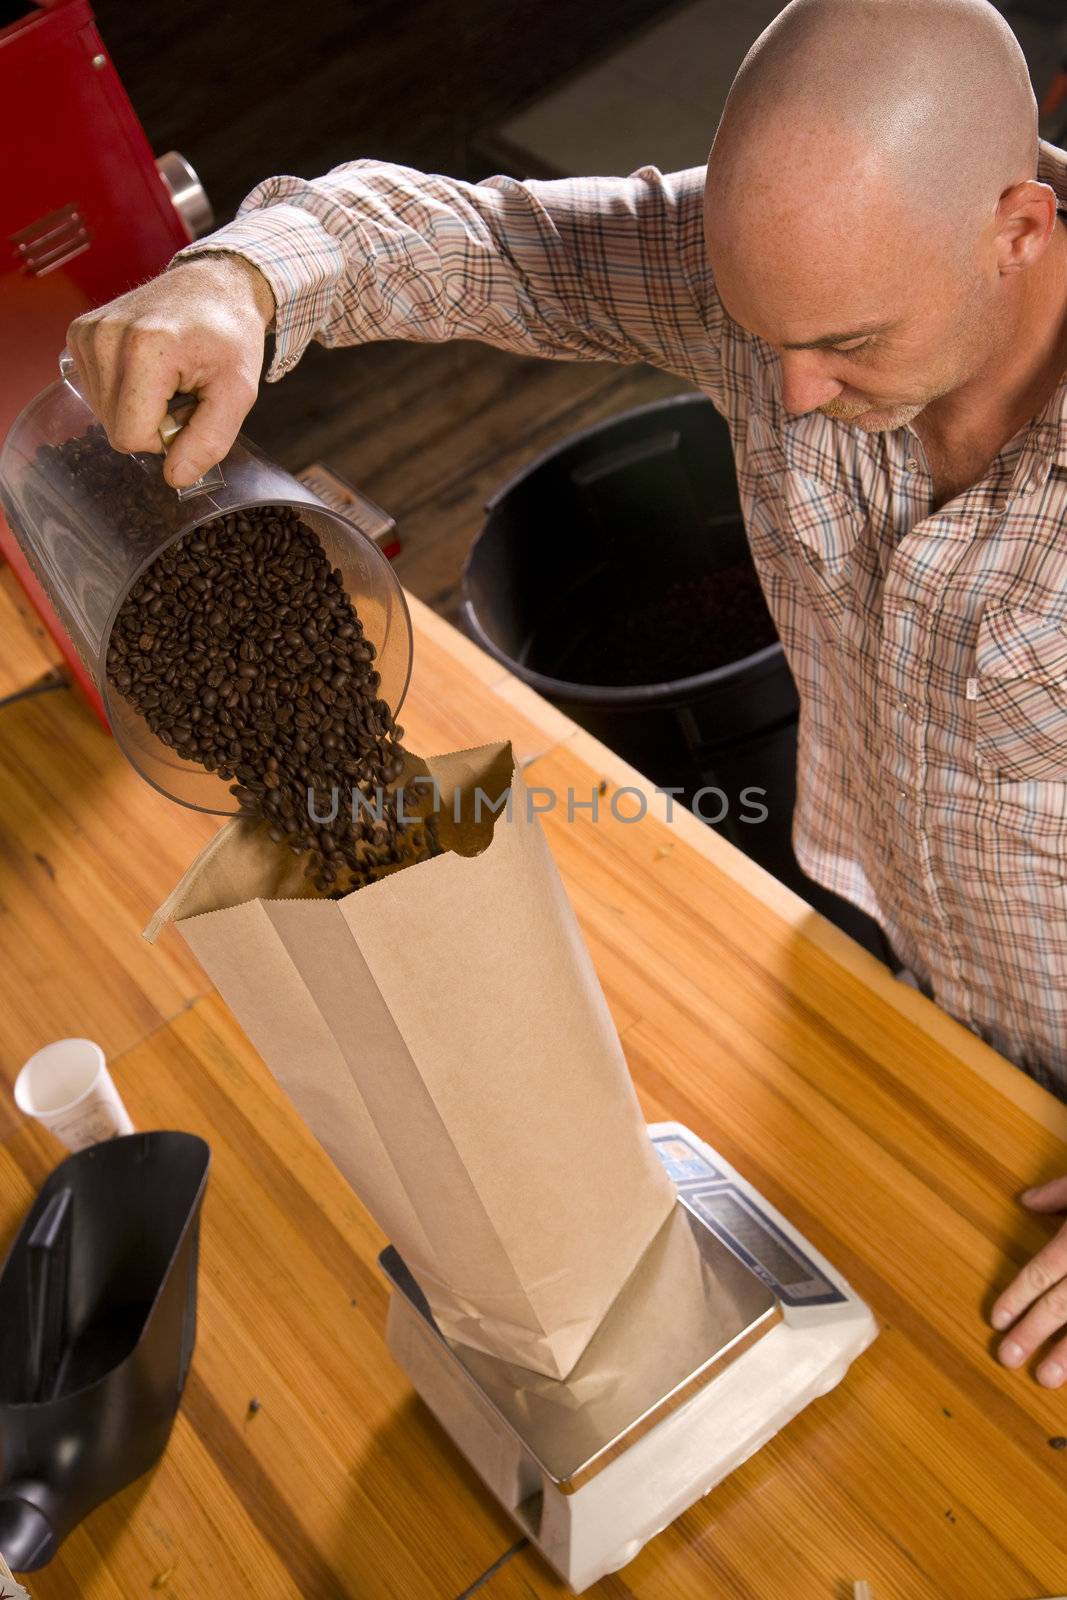 An experienced coffee roaster bags up his finished product.